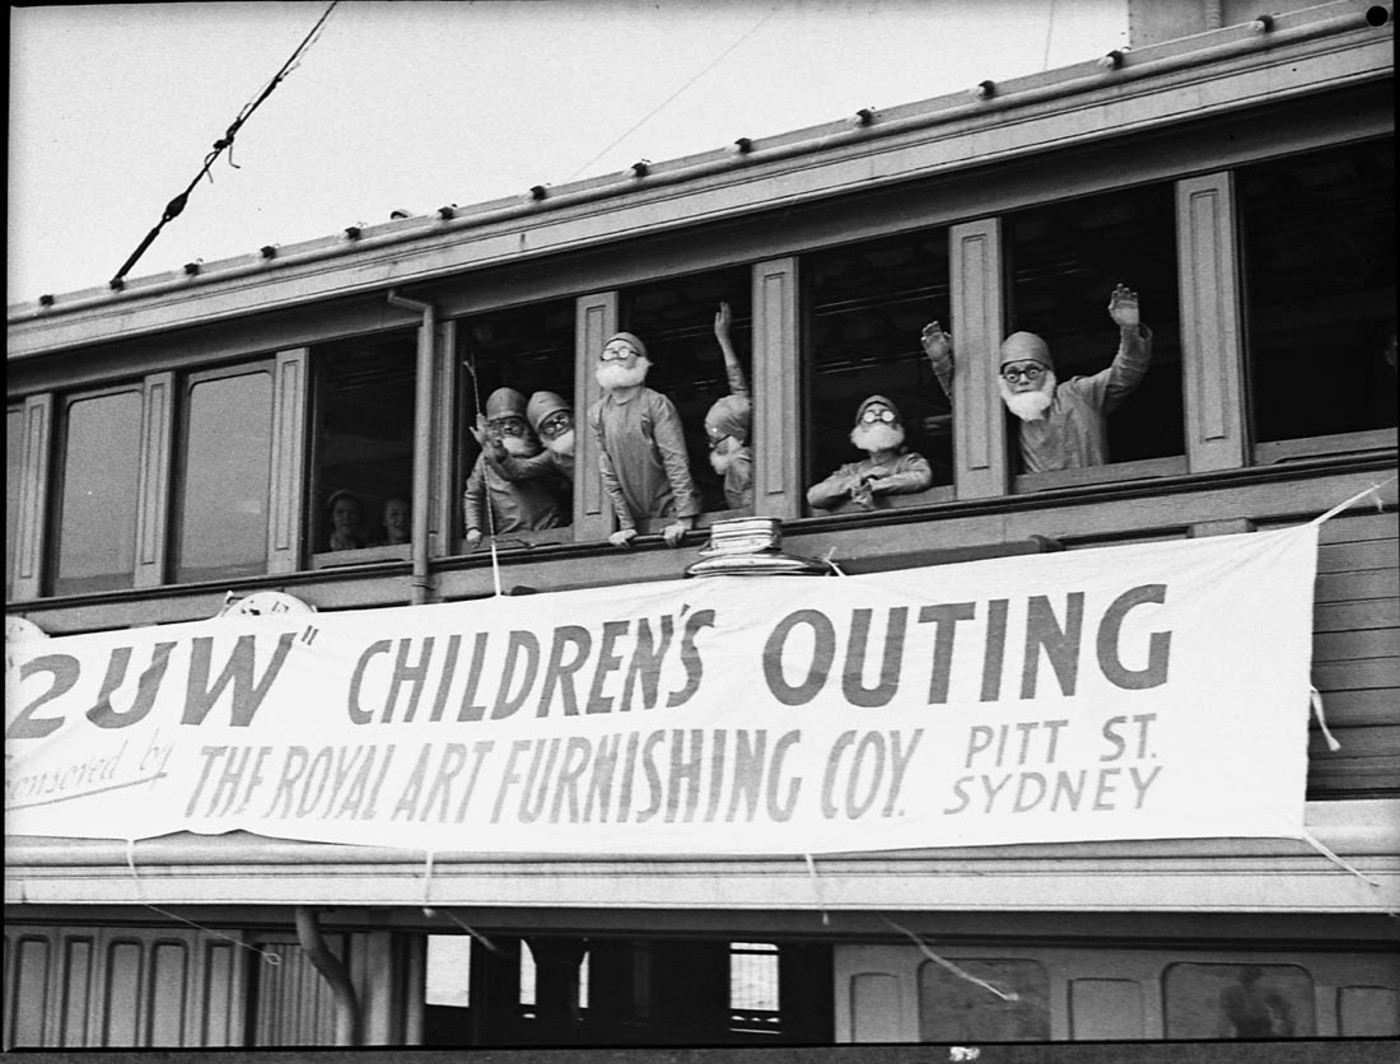 Gnomes looking out window of Kuttabul Ferry, during 2UW Harbour Cruise, 1937